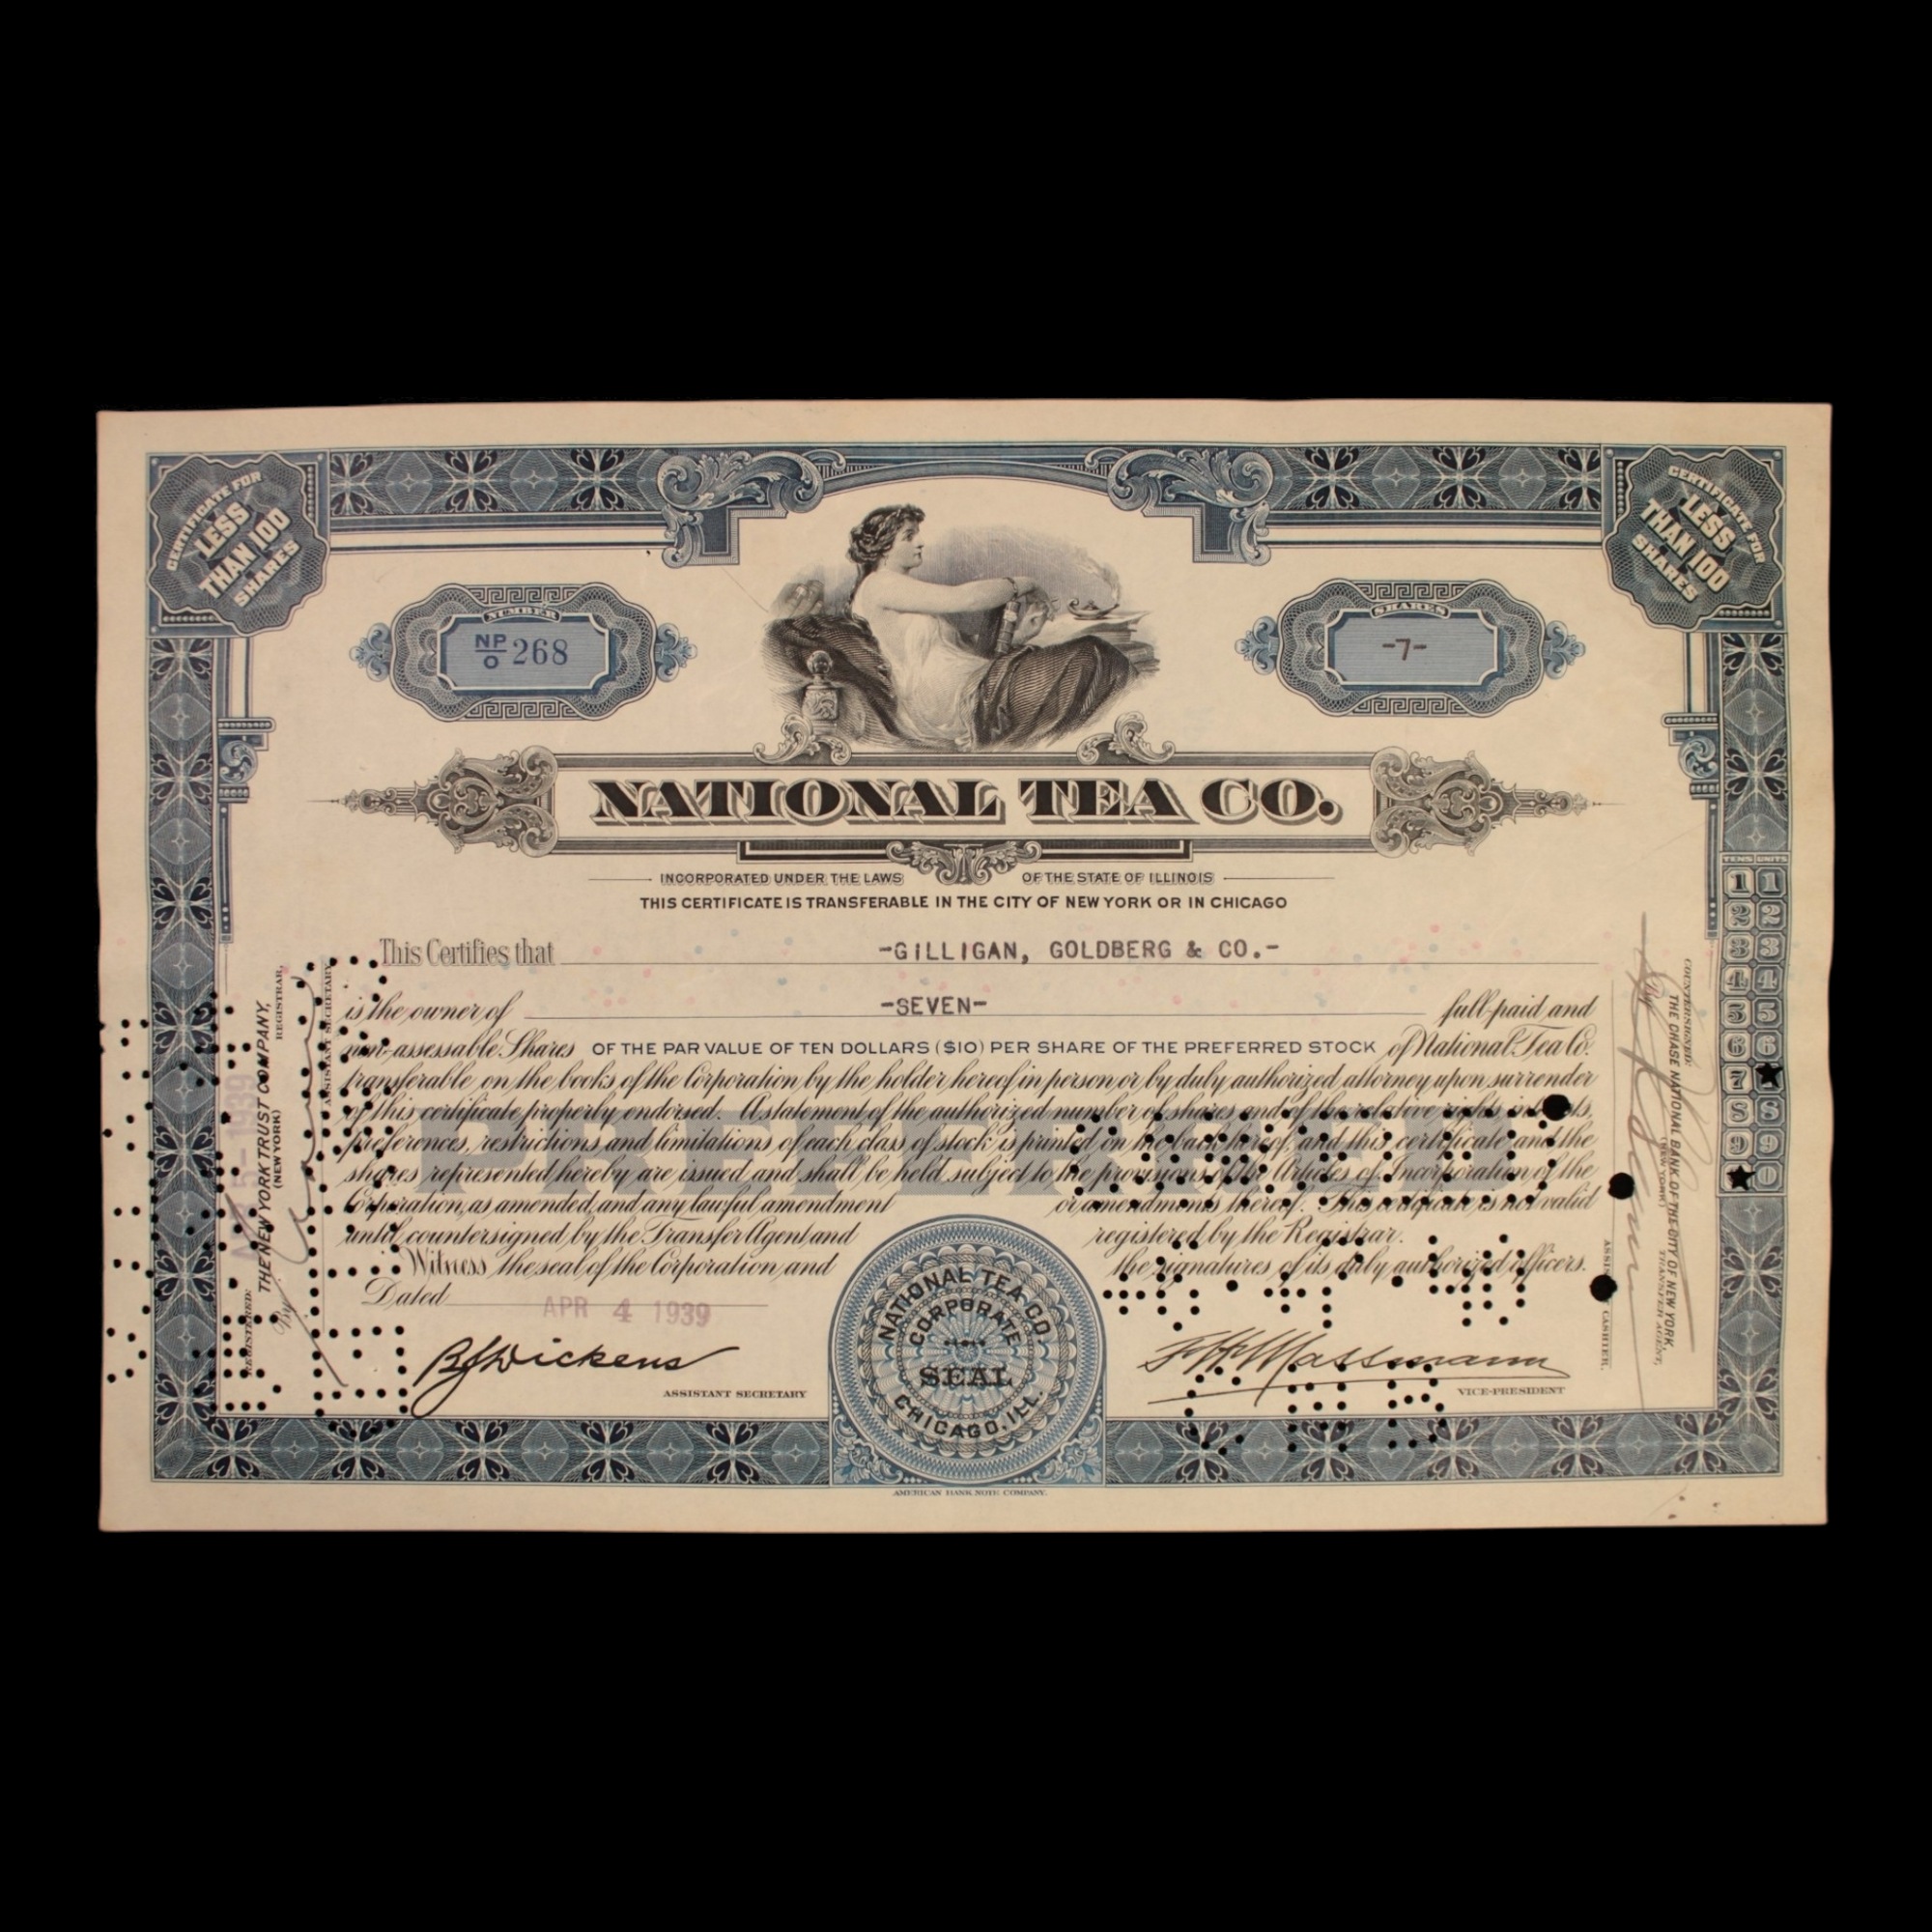 National Tea Co. Stock Certificate - 1930s - Grocery Store Chain